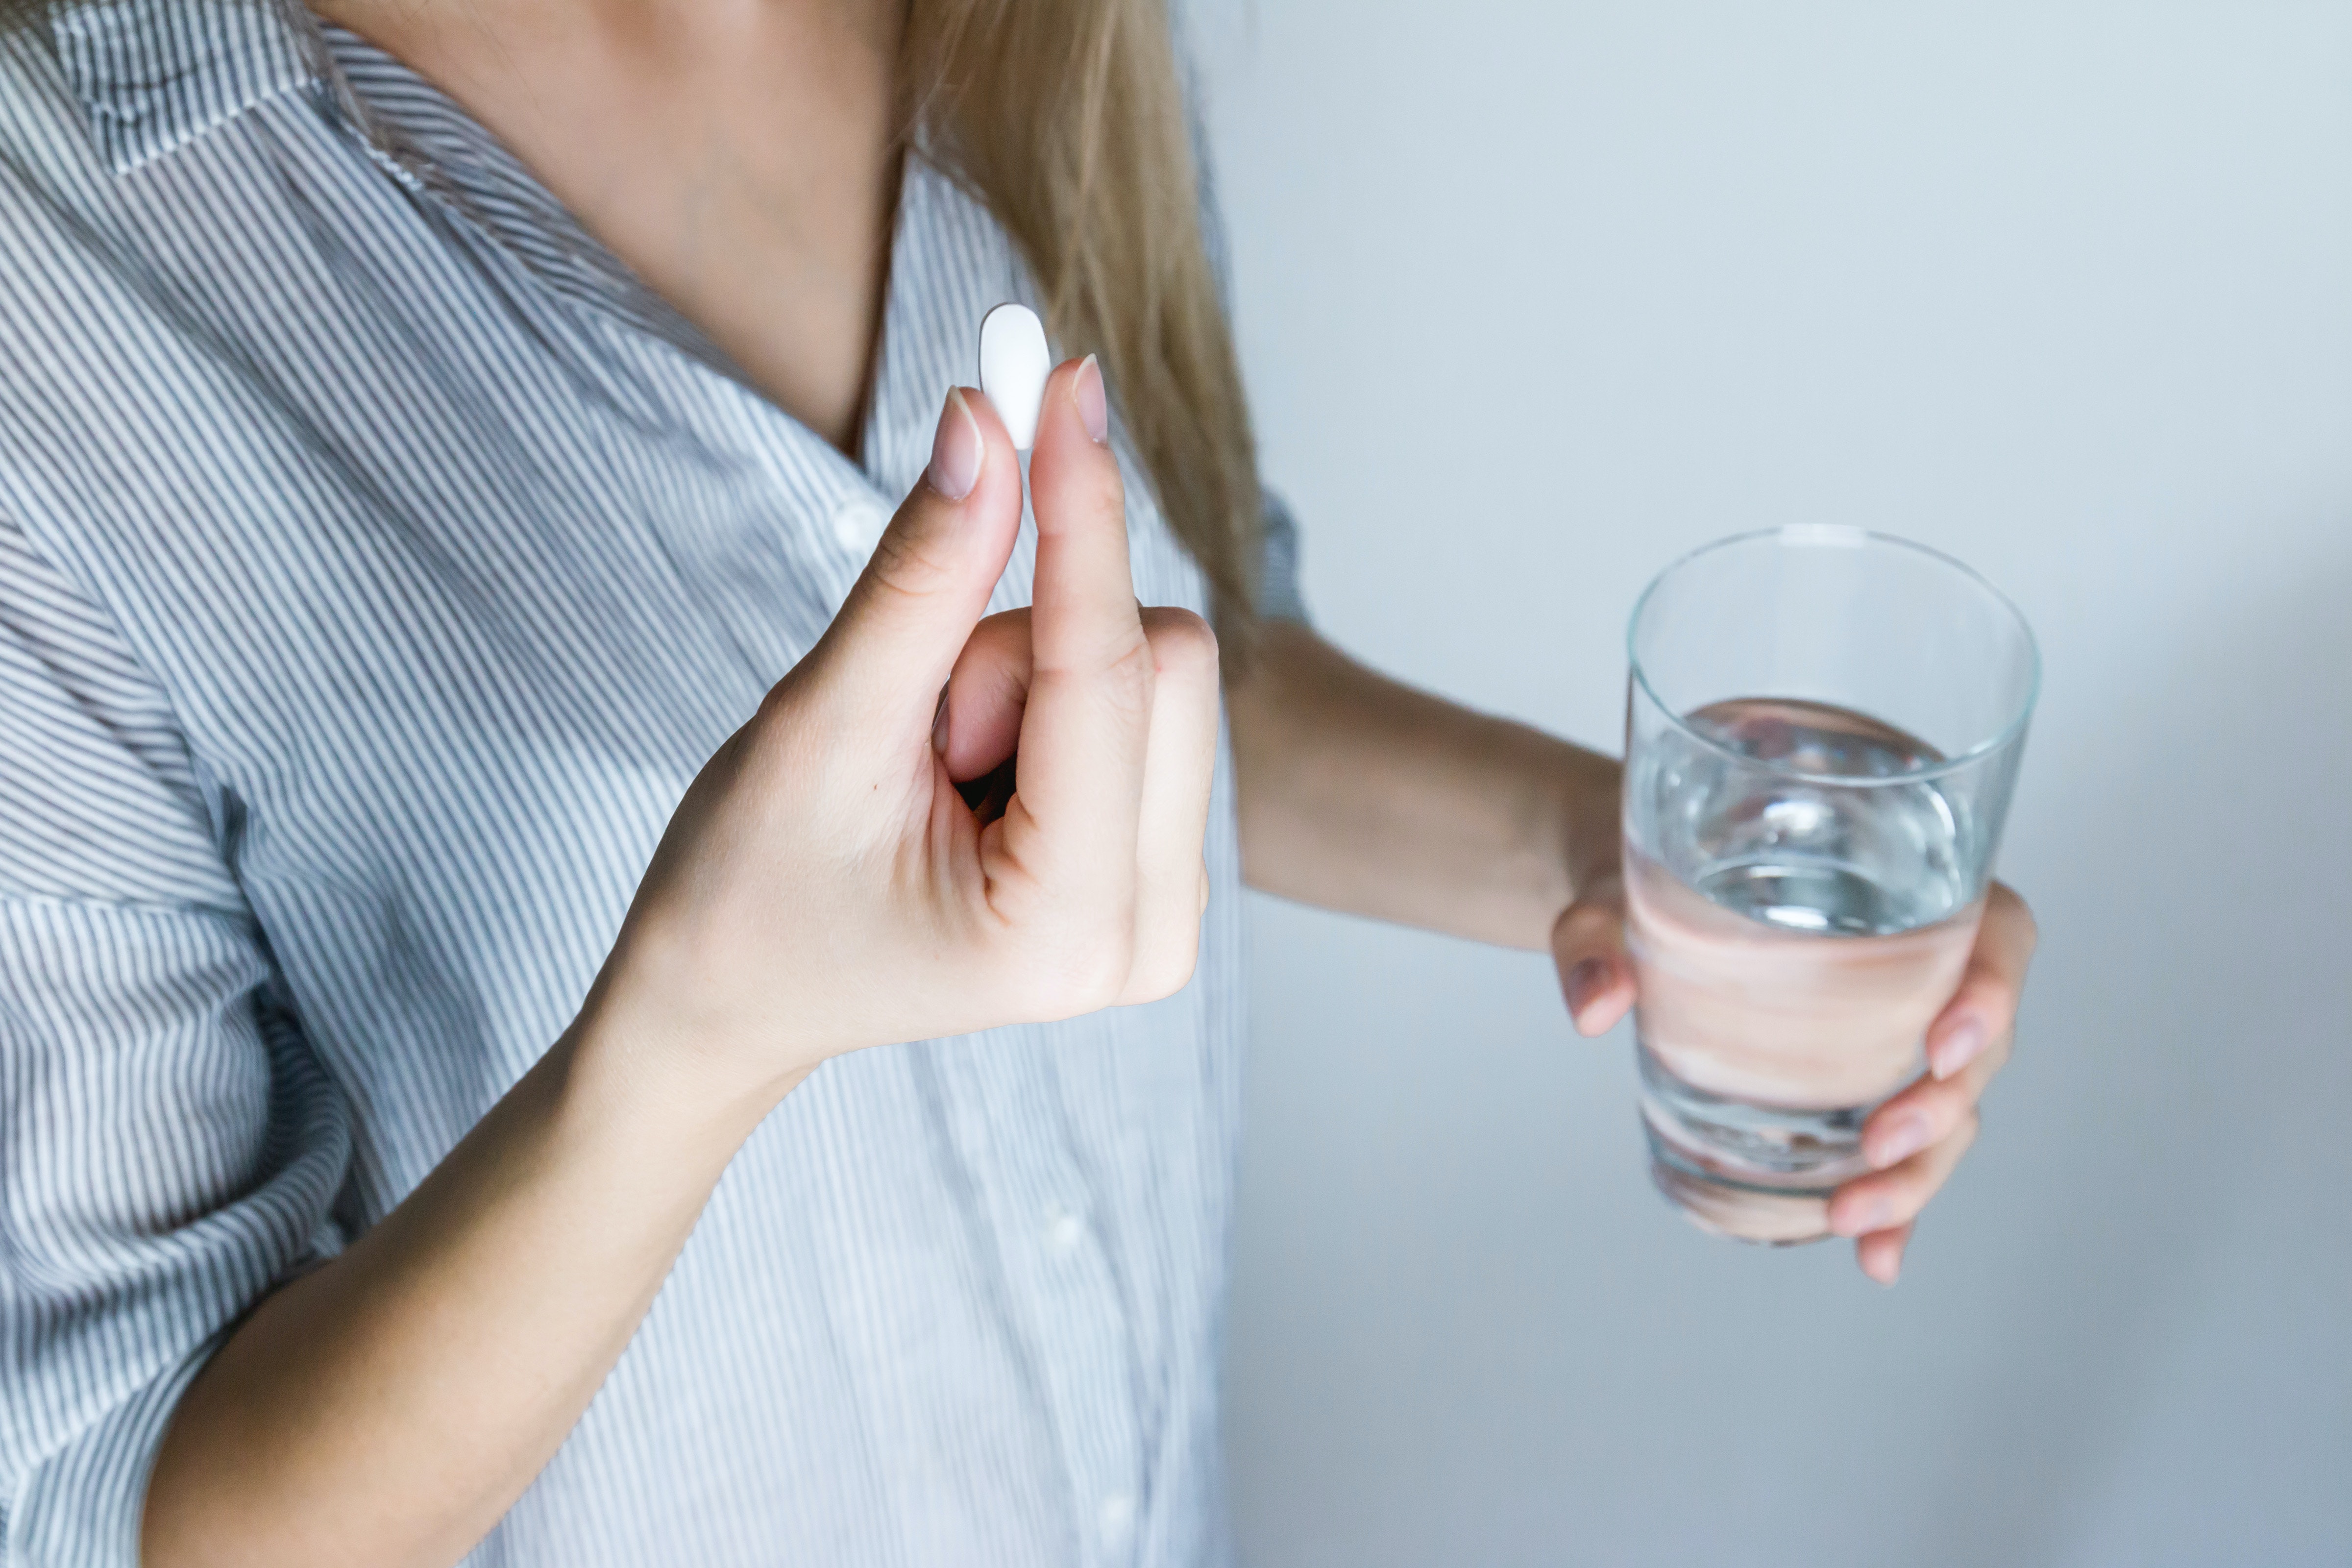 Woman in blue shirt holding white pill and glass of water